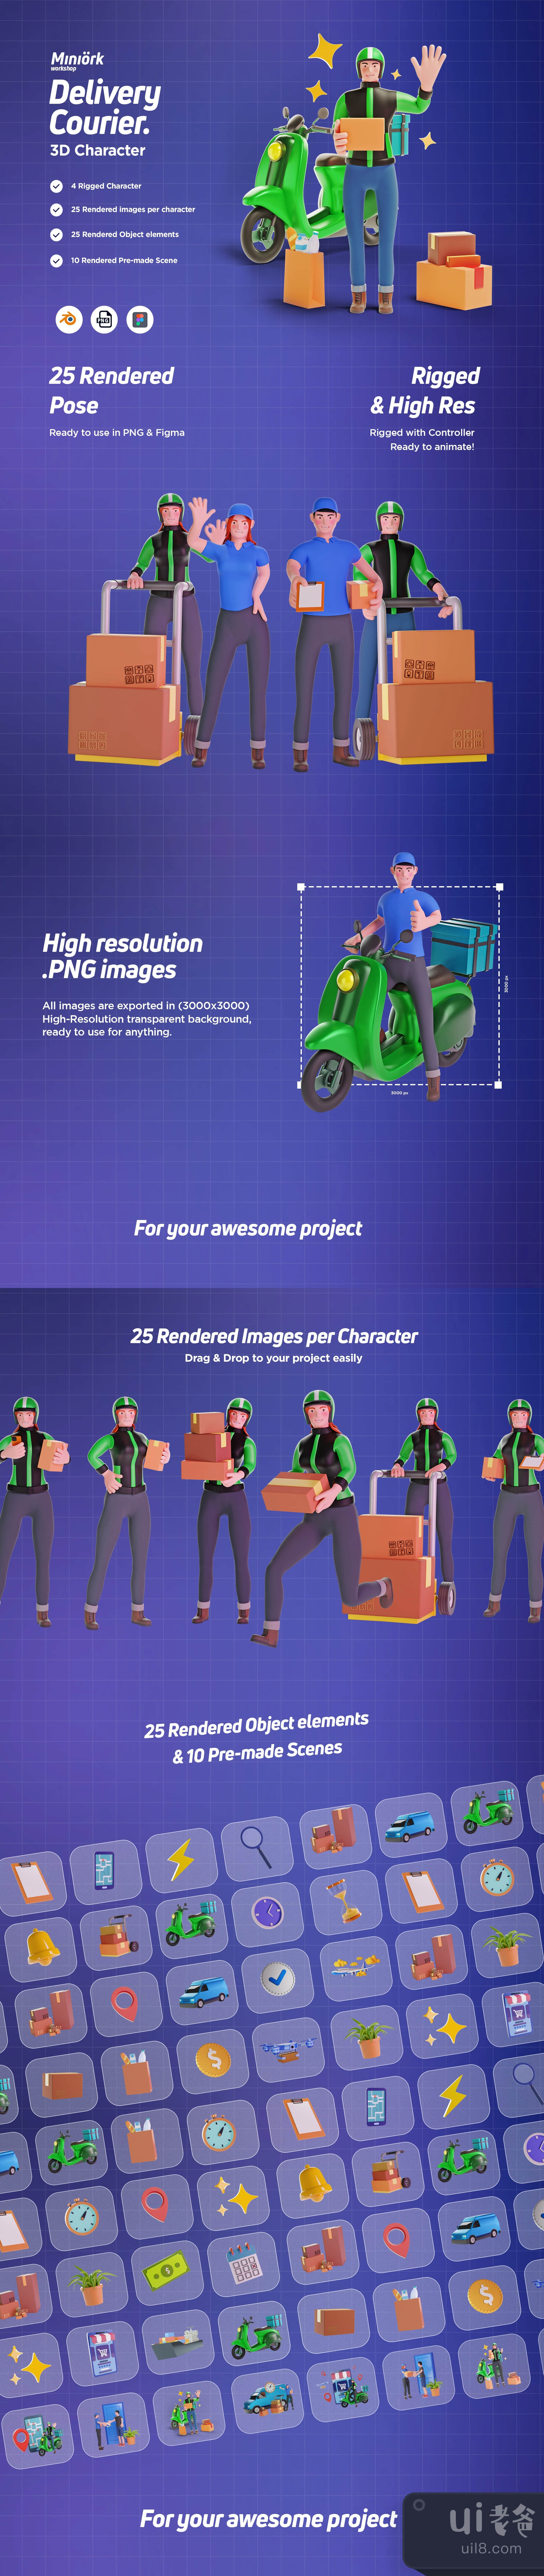 3D人物包 送货快递员 插图 (3D Character pack Delivery Courier插图